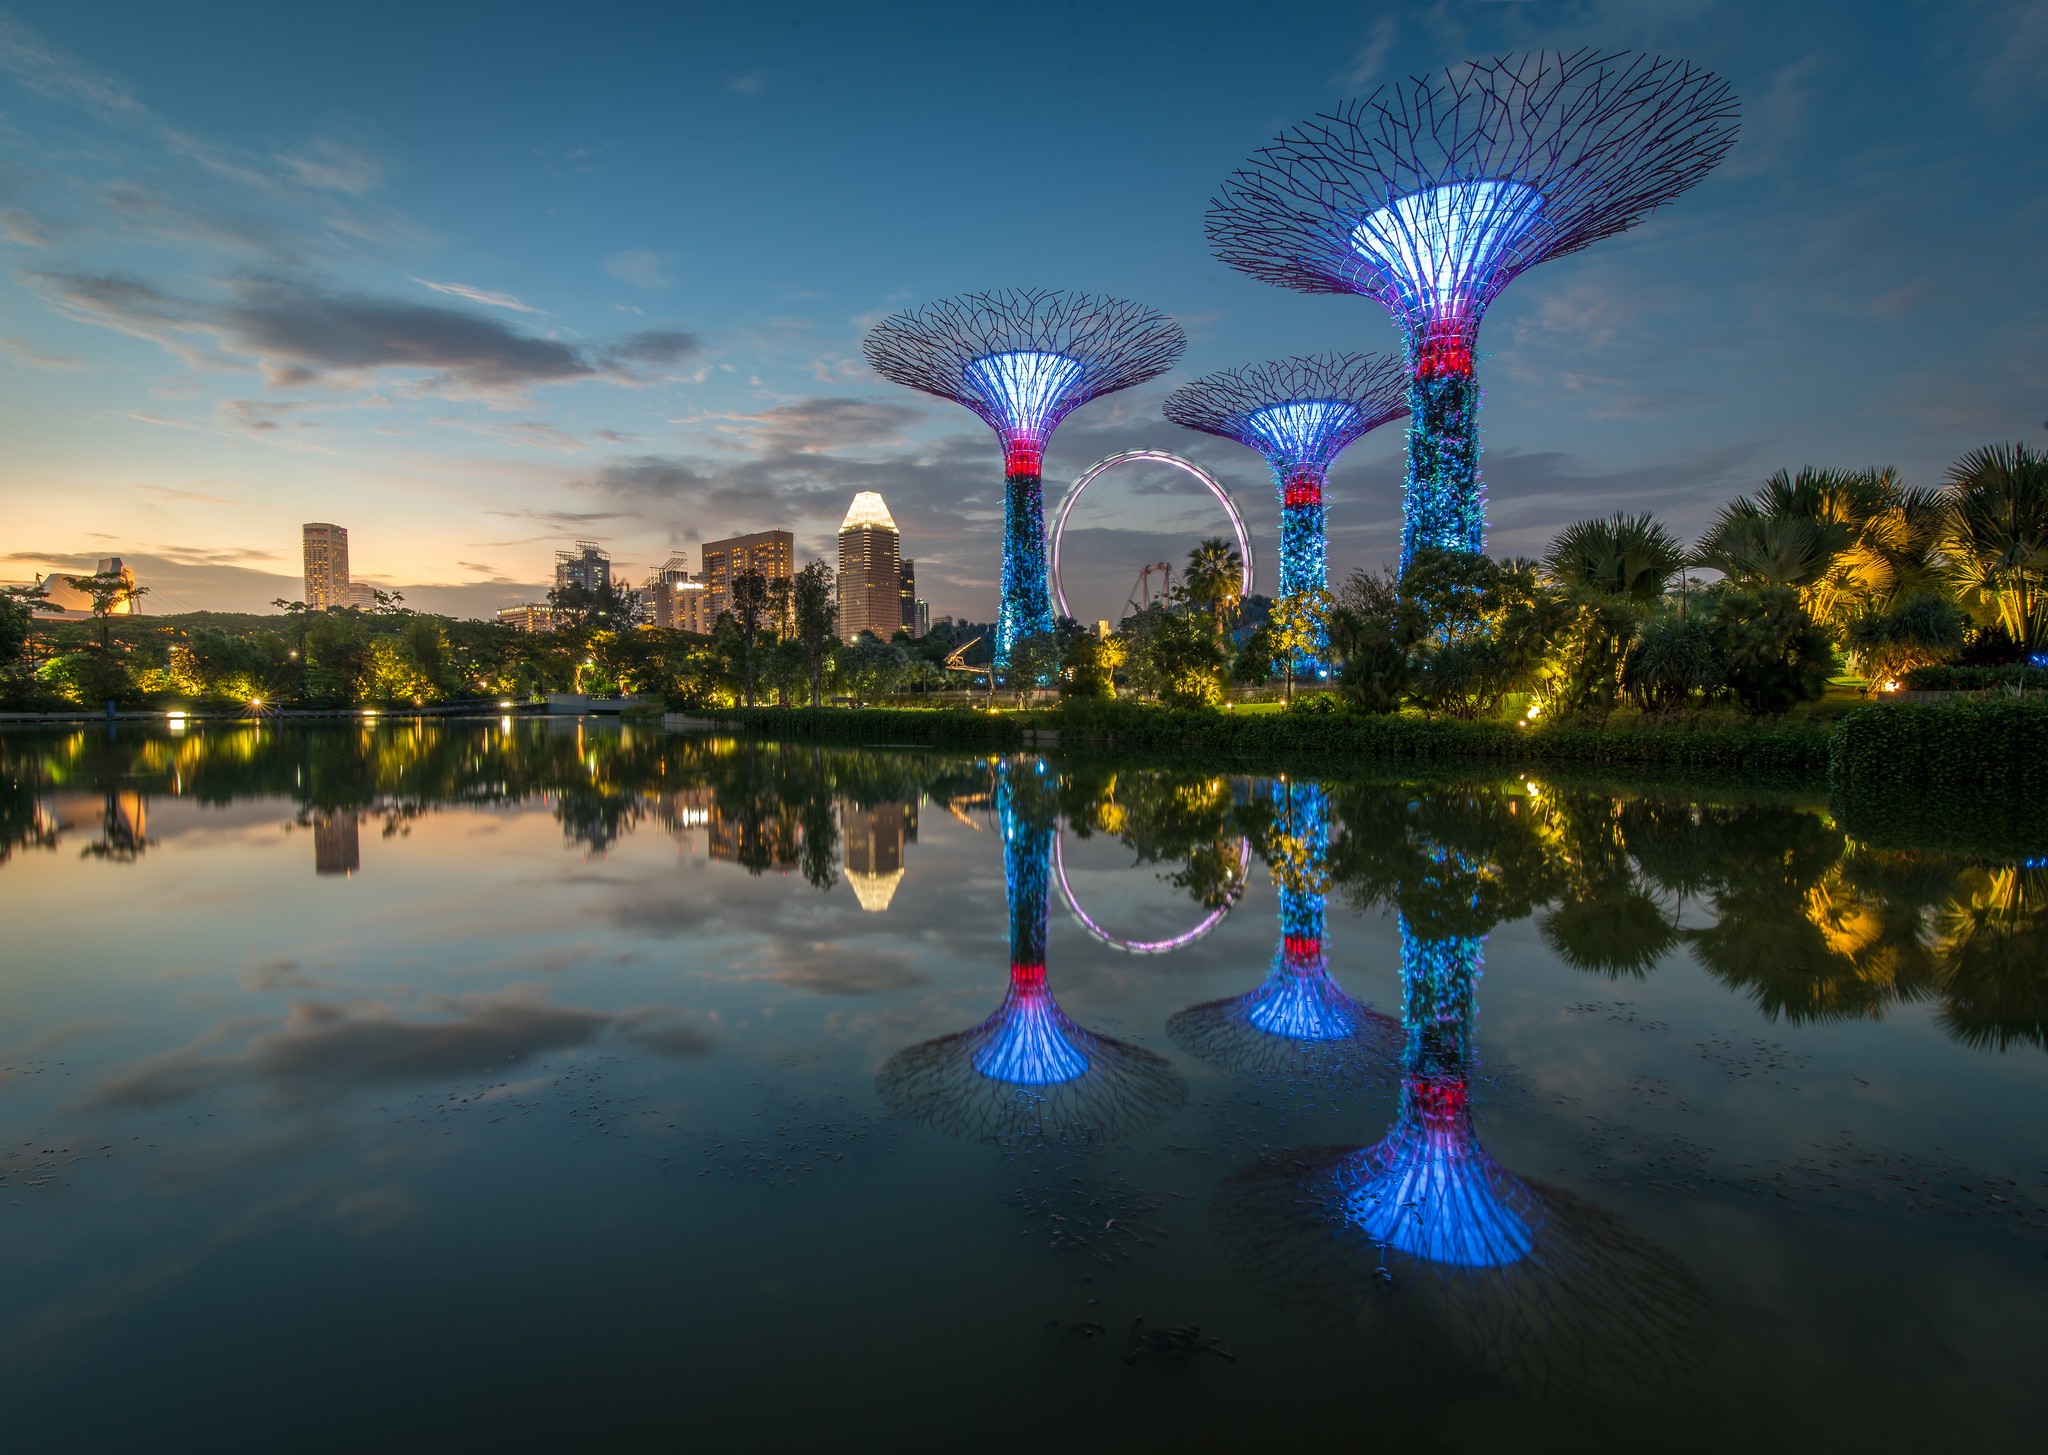 General 2048x1455 photography clouds landscape lake reflection architecture trees city lights sky Singapore Asia